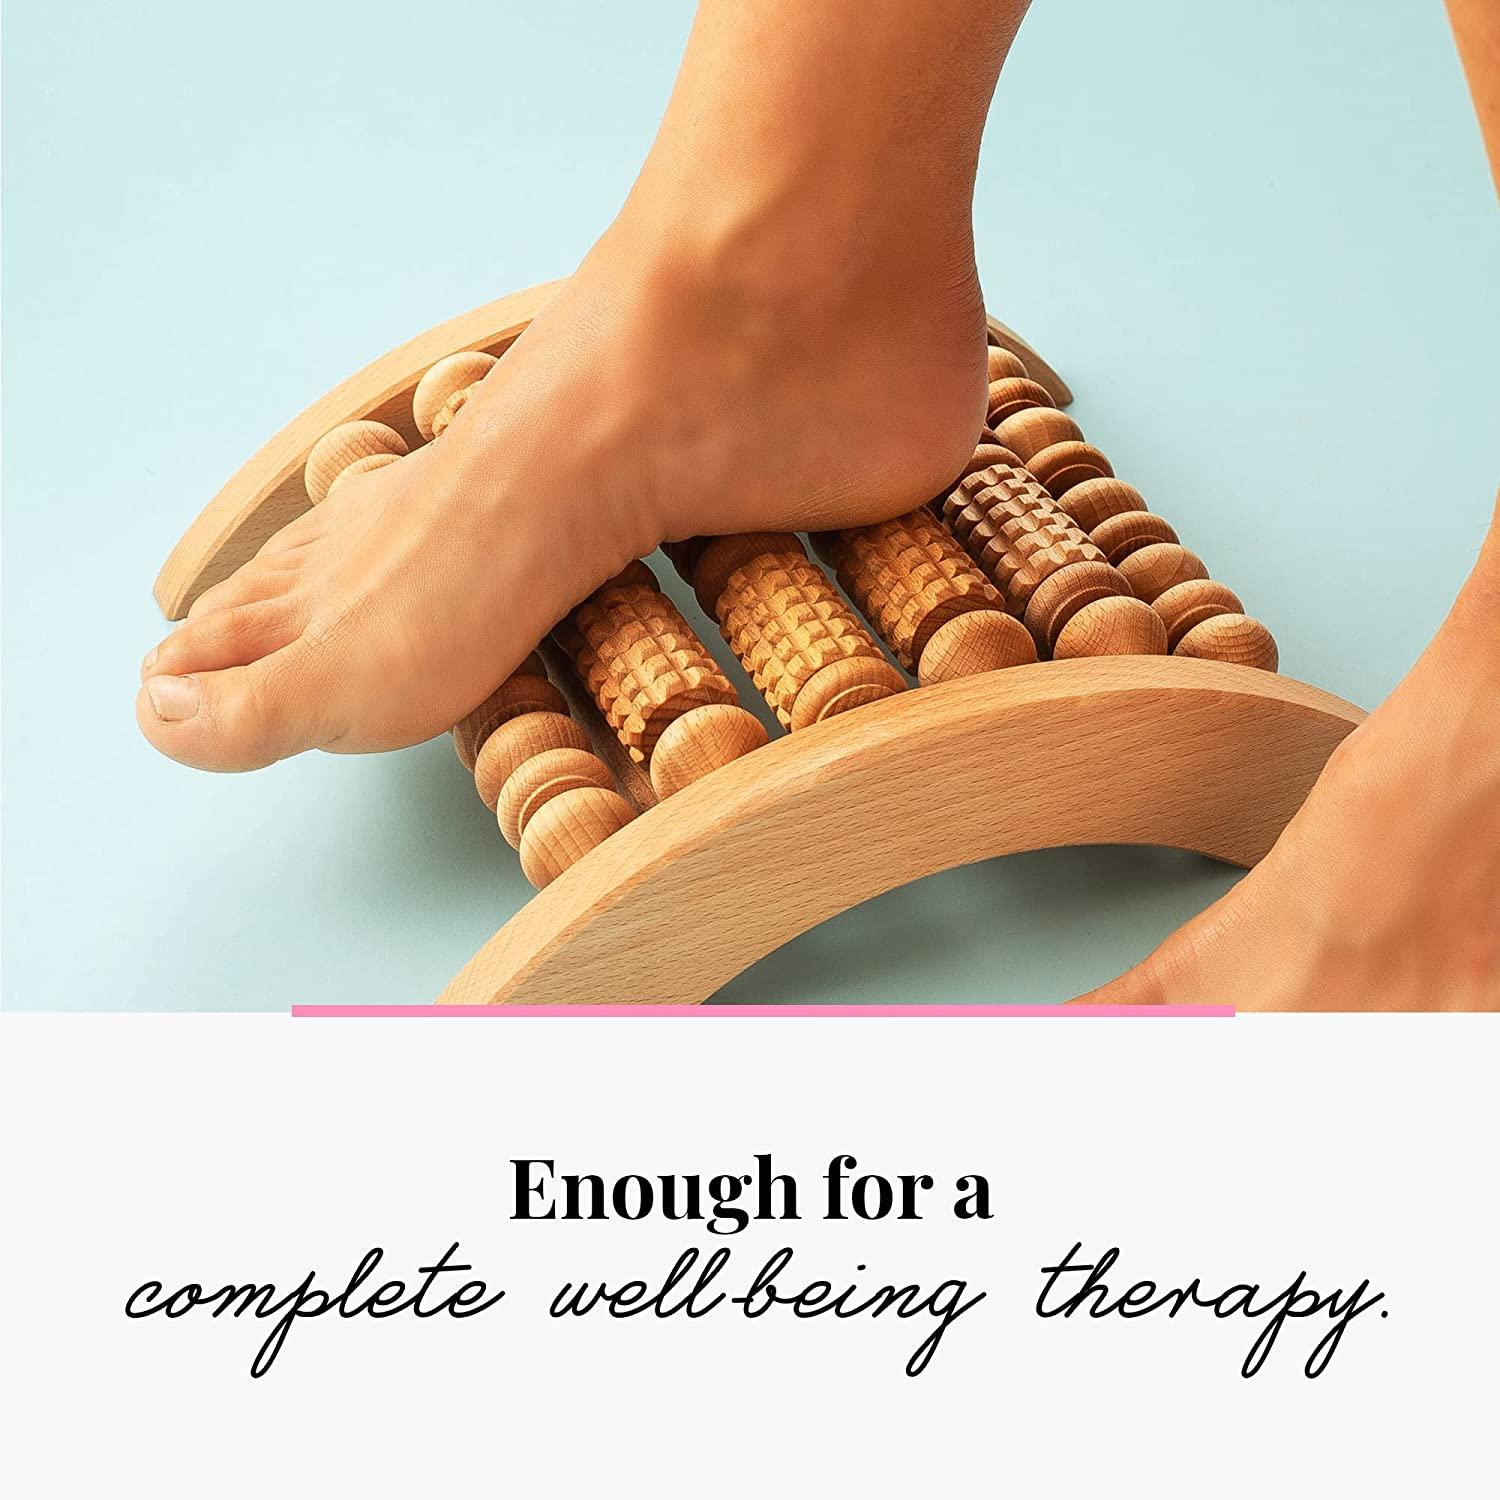 Wooden Foot Roller Massager - Wood Care Massage Tool for